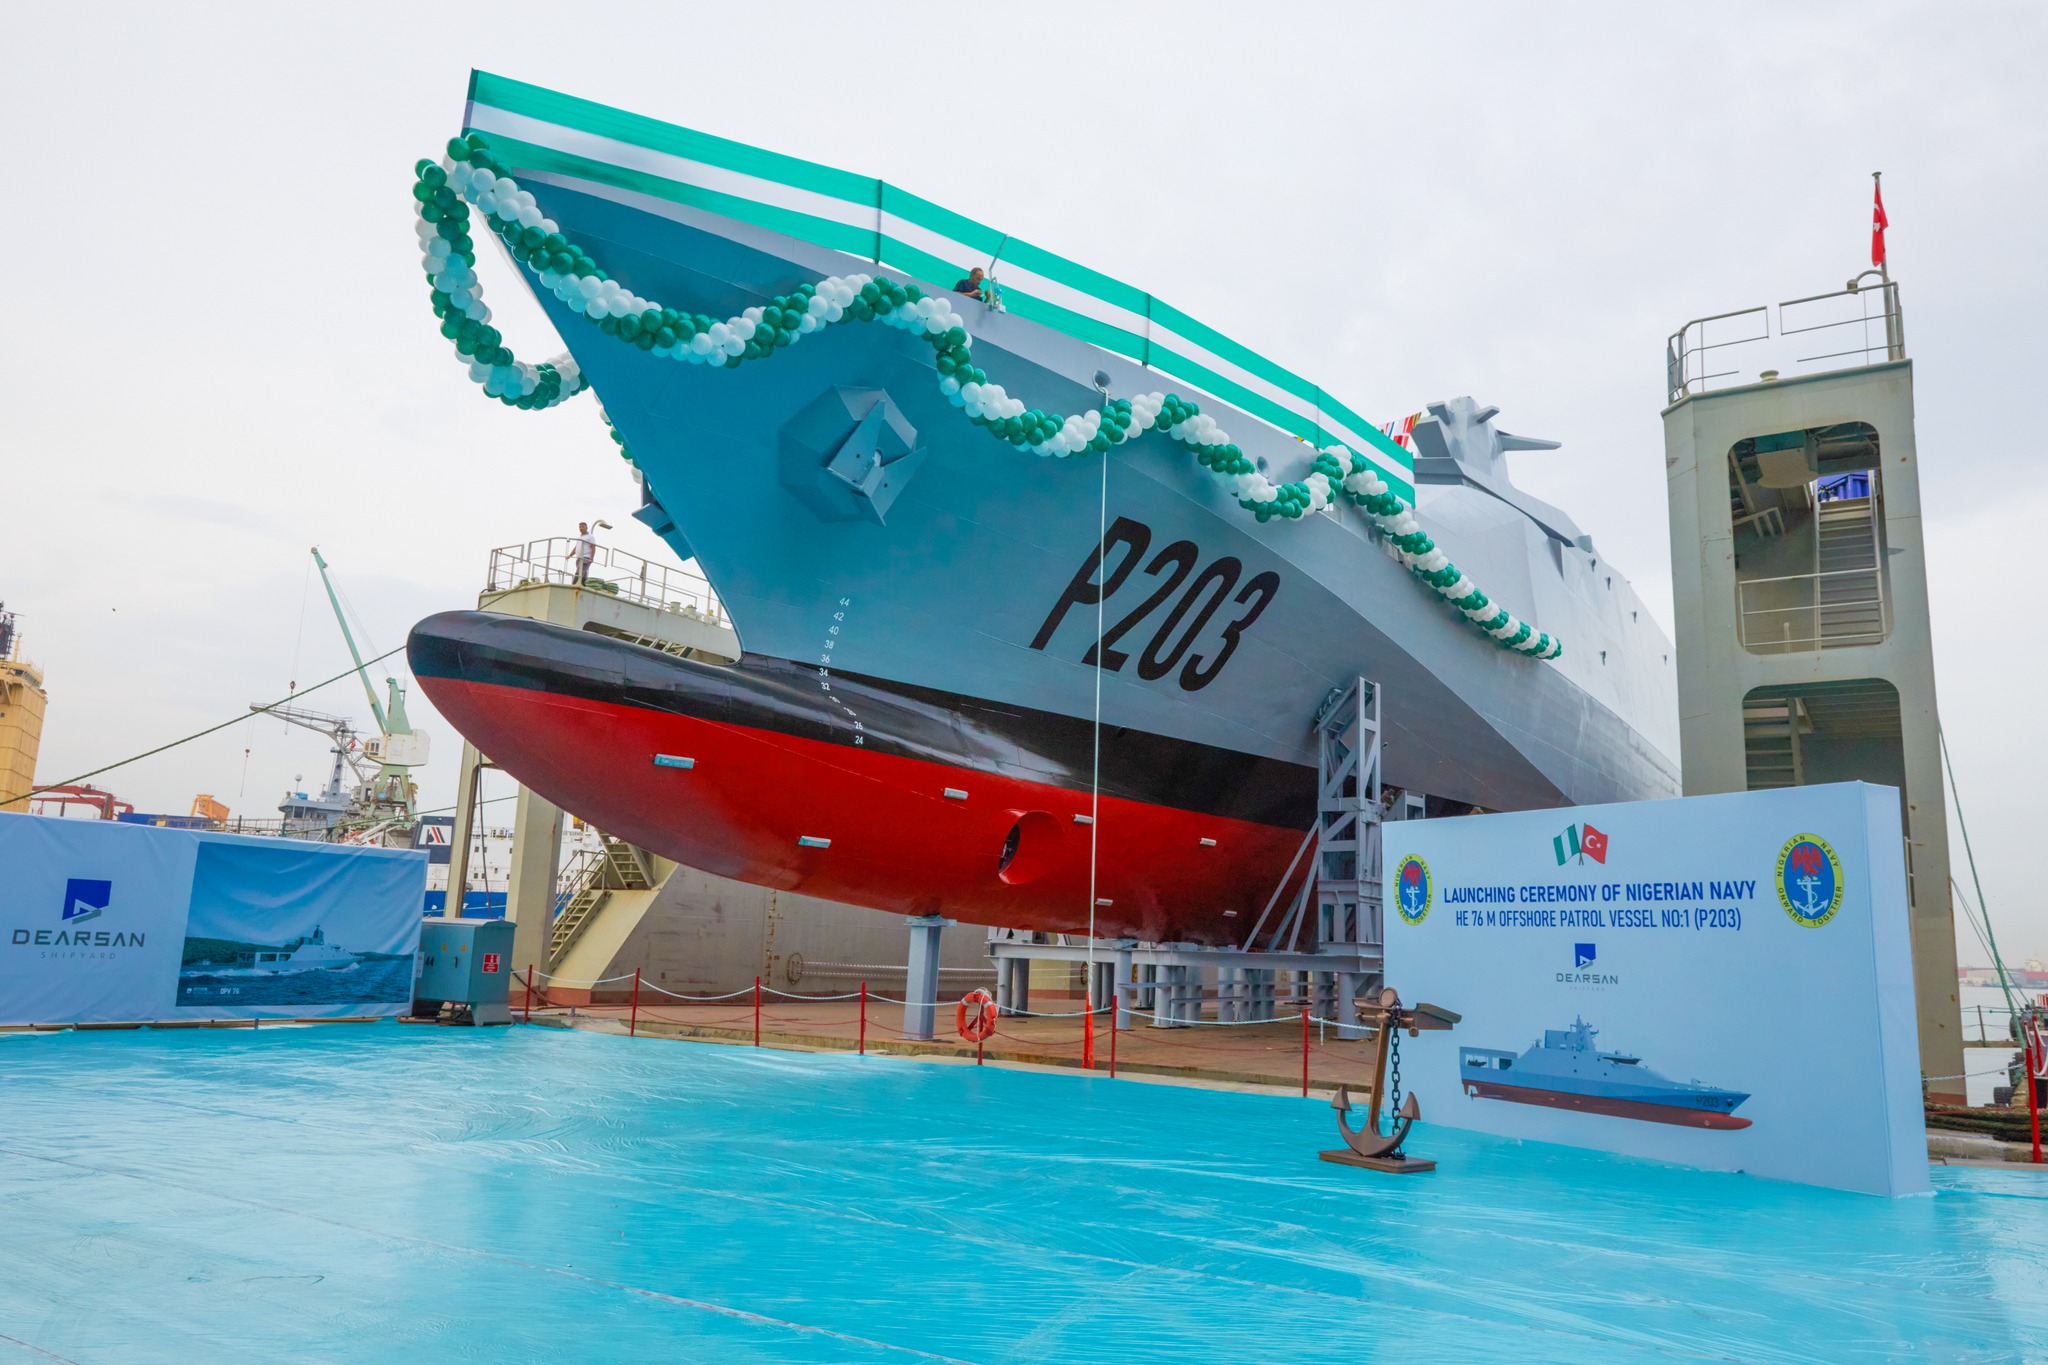 The new Nigerian Navy offshore patrol vessel, P203, is seen in a shipyard in Istanbul, Turkey. A rope of balloons decorate its deck's perimeter and a sign that says "LAUNCHING CEREMONY OF NIGERIAN ARMY HE 76M OFFSHORE PATROL VESSEL NO. 1 (P203)" is seen erected on the ground. The ship's grey hull has the name P203 painted in black, on the left.